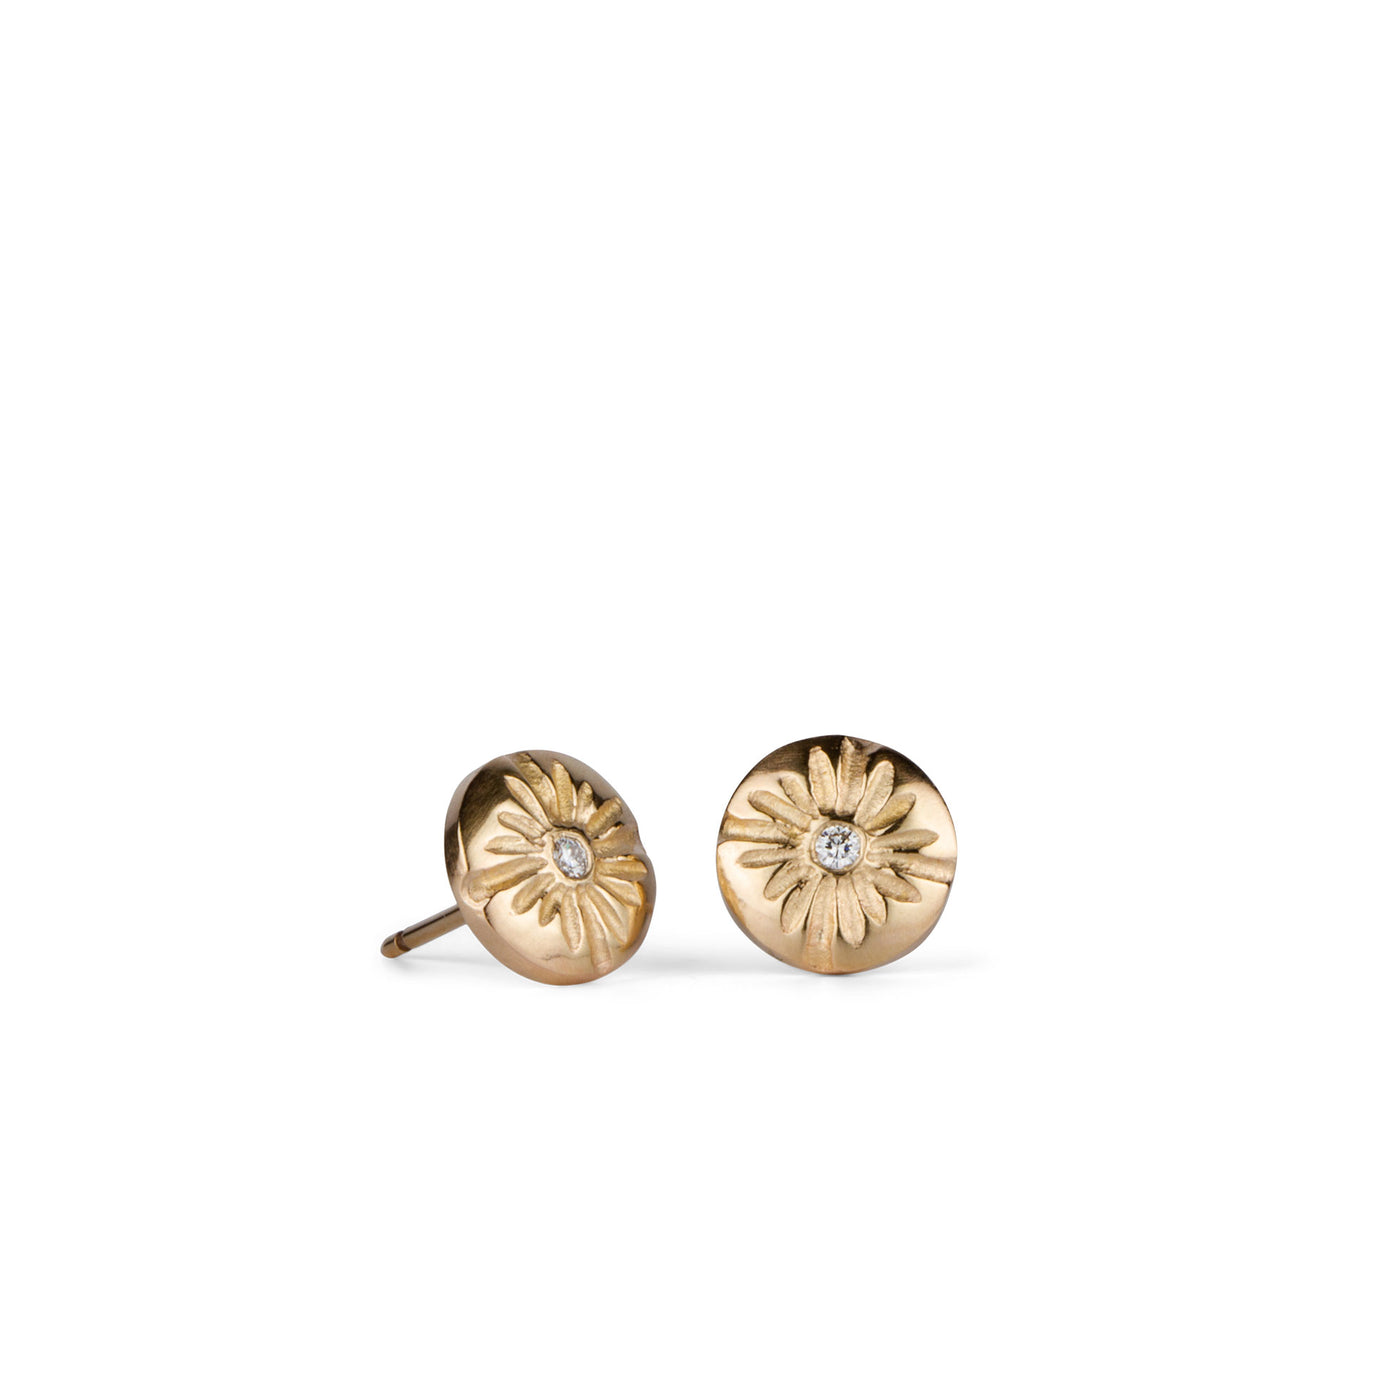 Small round carved sunburst stud earrings with diamond centers in gold side view on a white background